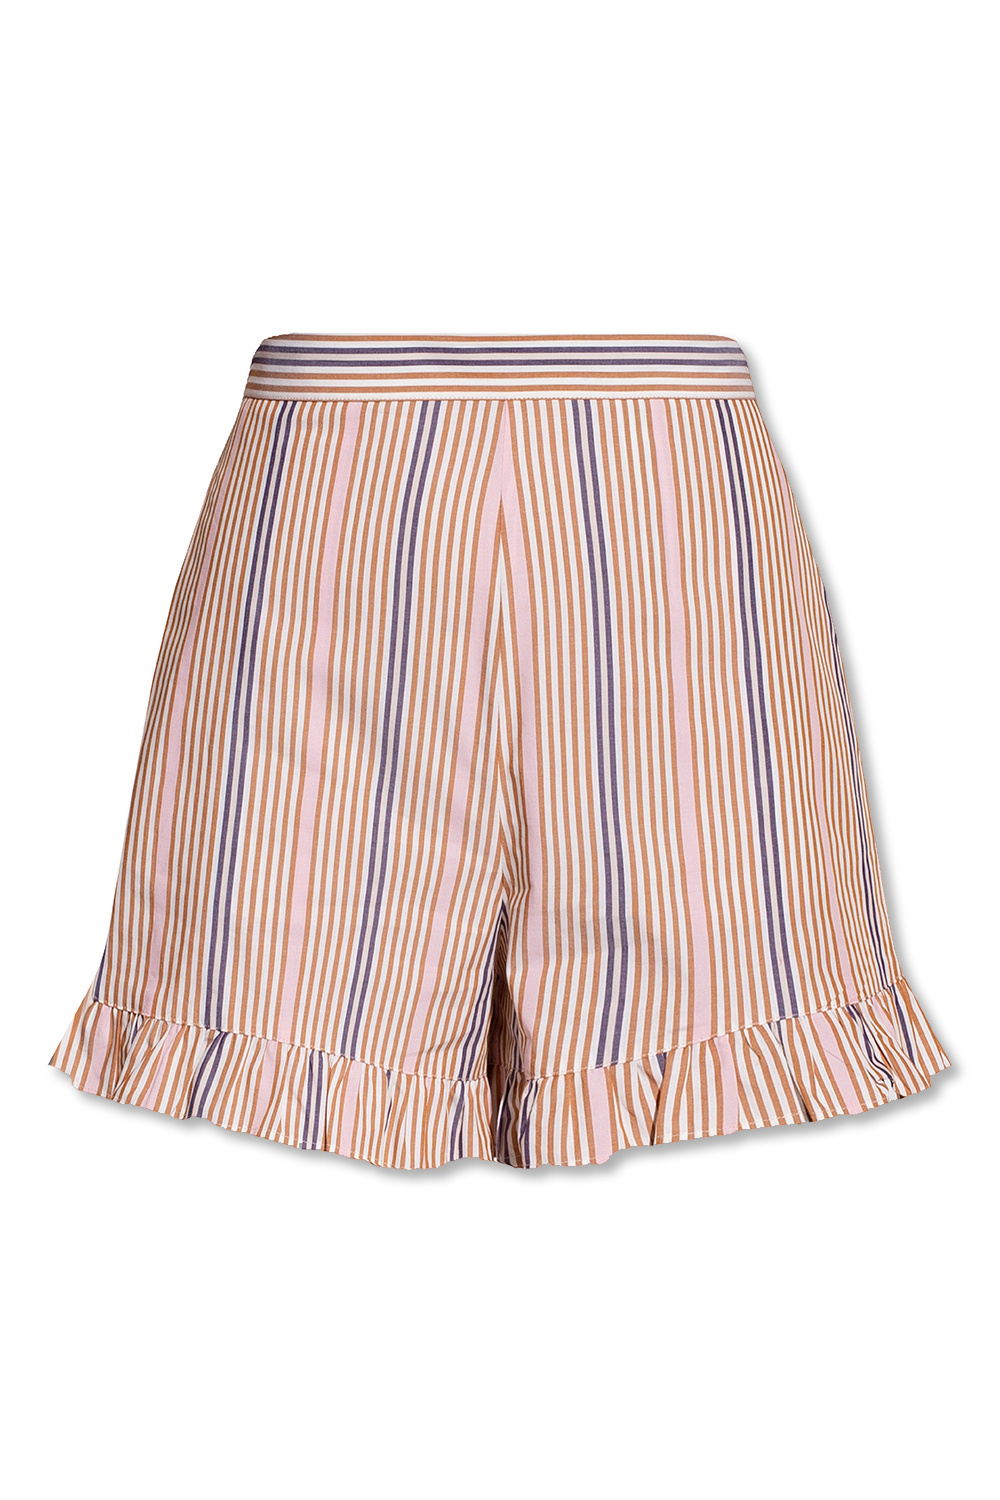 See By chloe SUNGLASSES Striped shorts